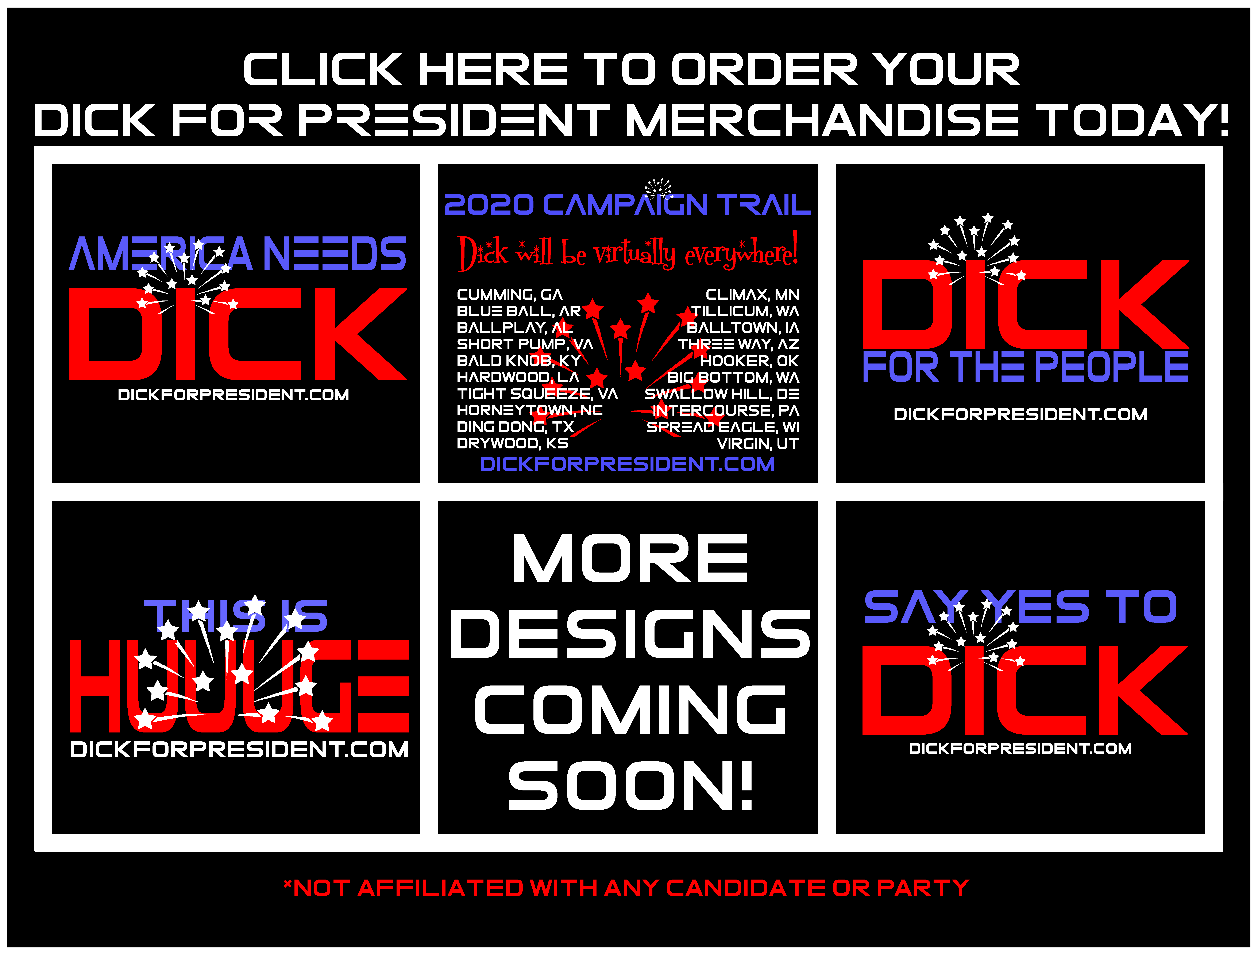 Show your support for Dick! He'll work HARDER & LONGER for your vote.  Order your official Dick For President merchandise today! DIRECT LINK: https://teespring.com/dickforpresident  See more Dick For President designs and LEARN MORE ABOUT THE CAMPAIGN AT: http://DickForPresident.com  Election Day is Coming!  Not affiliated with any political party or candidate. All Images Copyright 2019 